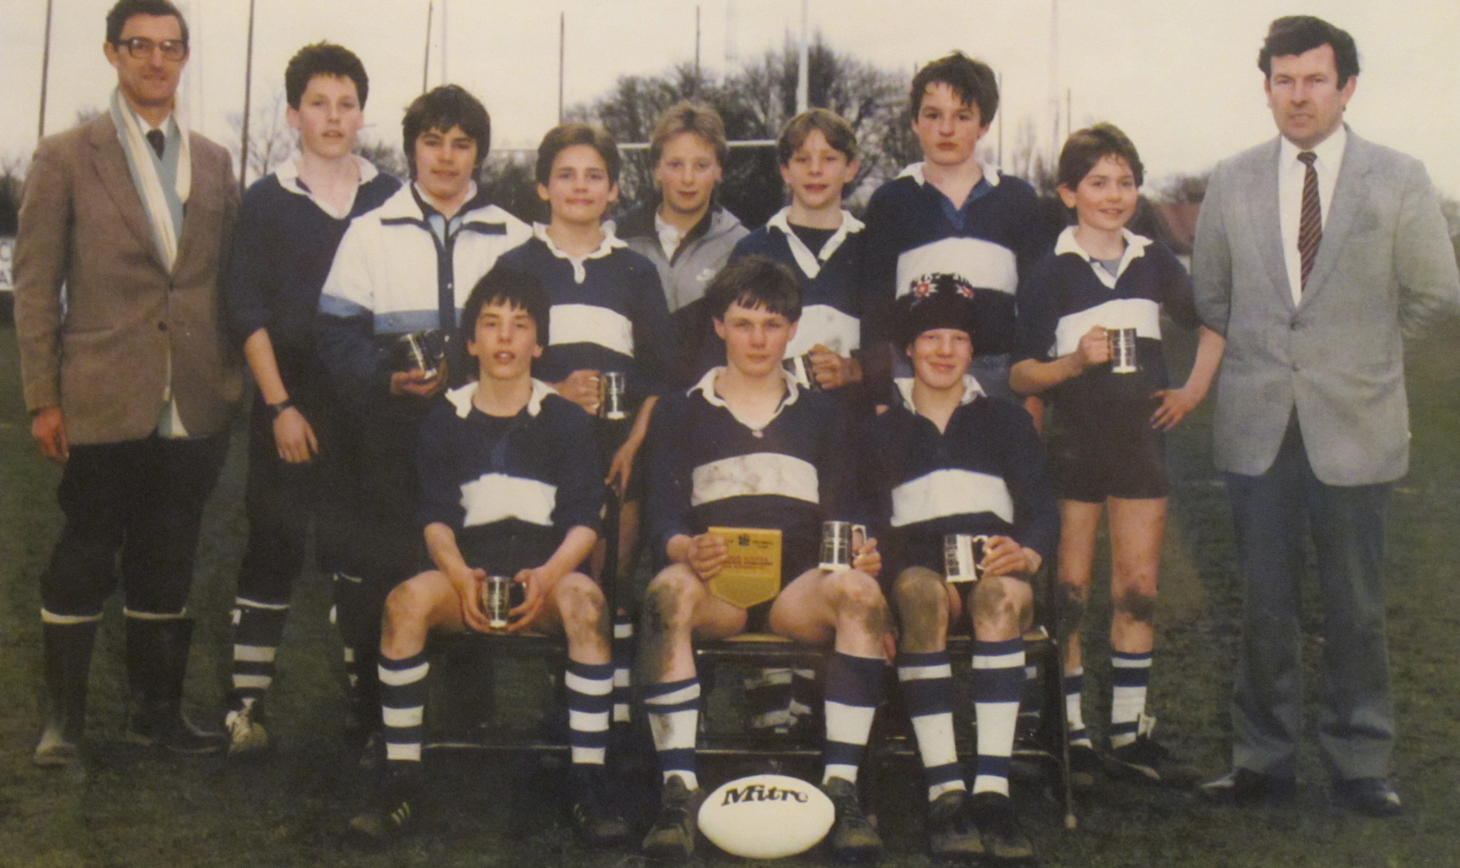 Class of '91 rugby team, but what year was it taken?